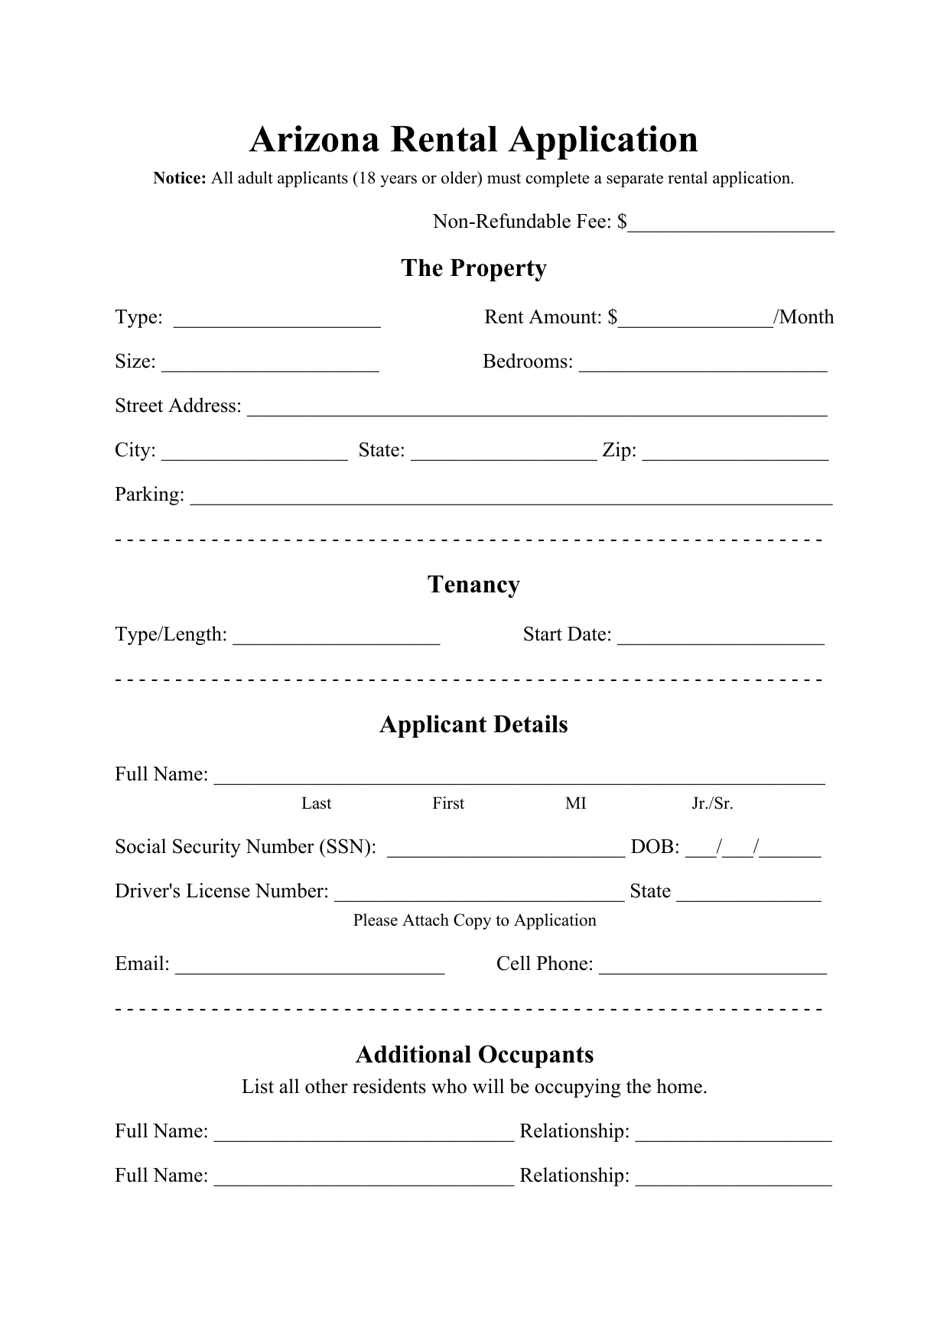 arizona-rental-application-form-fill-out-sign-online-and-download